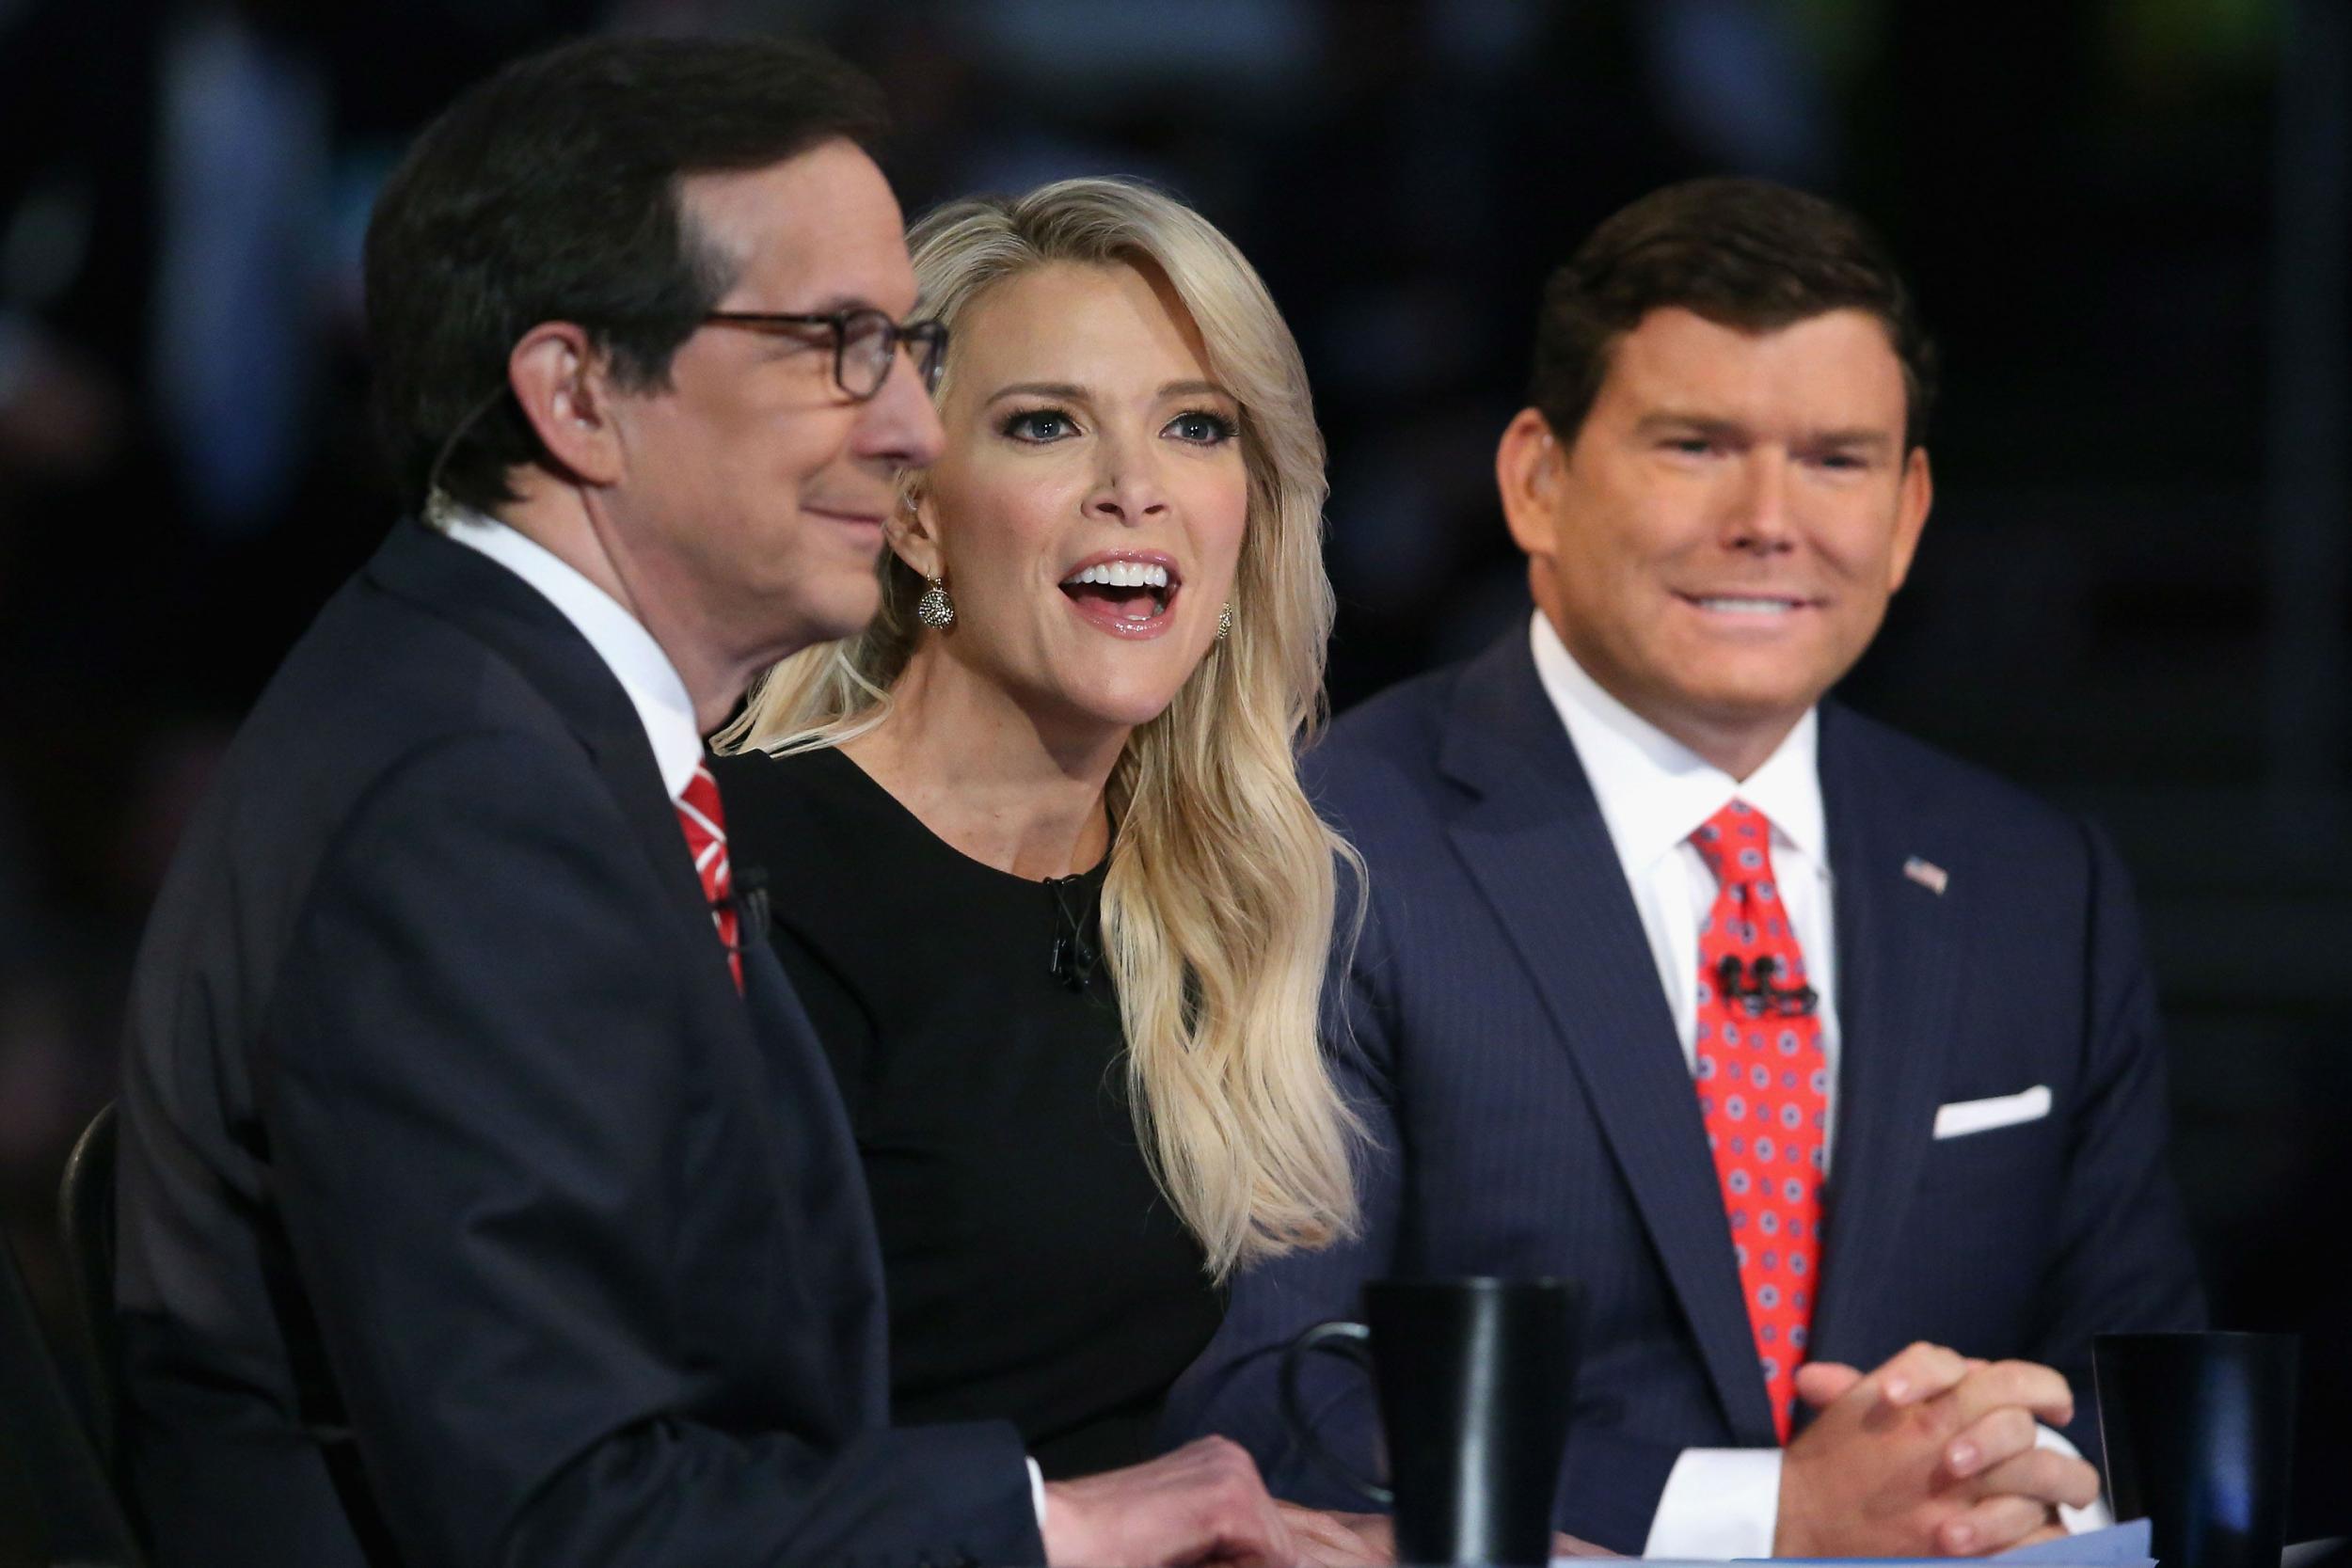 Chris Wallace, left, moderating a primary debate in January with colleagues Megyn Kelly and Bret Baier